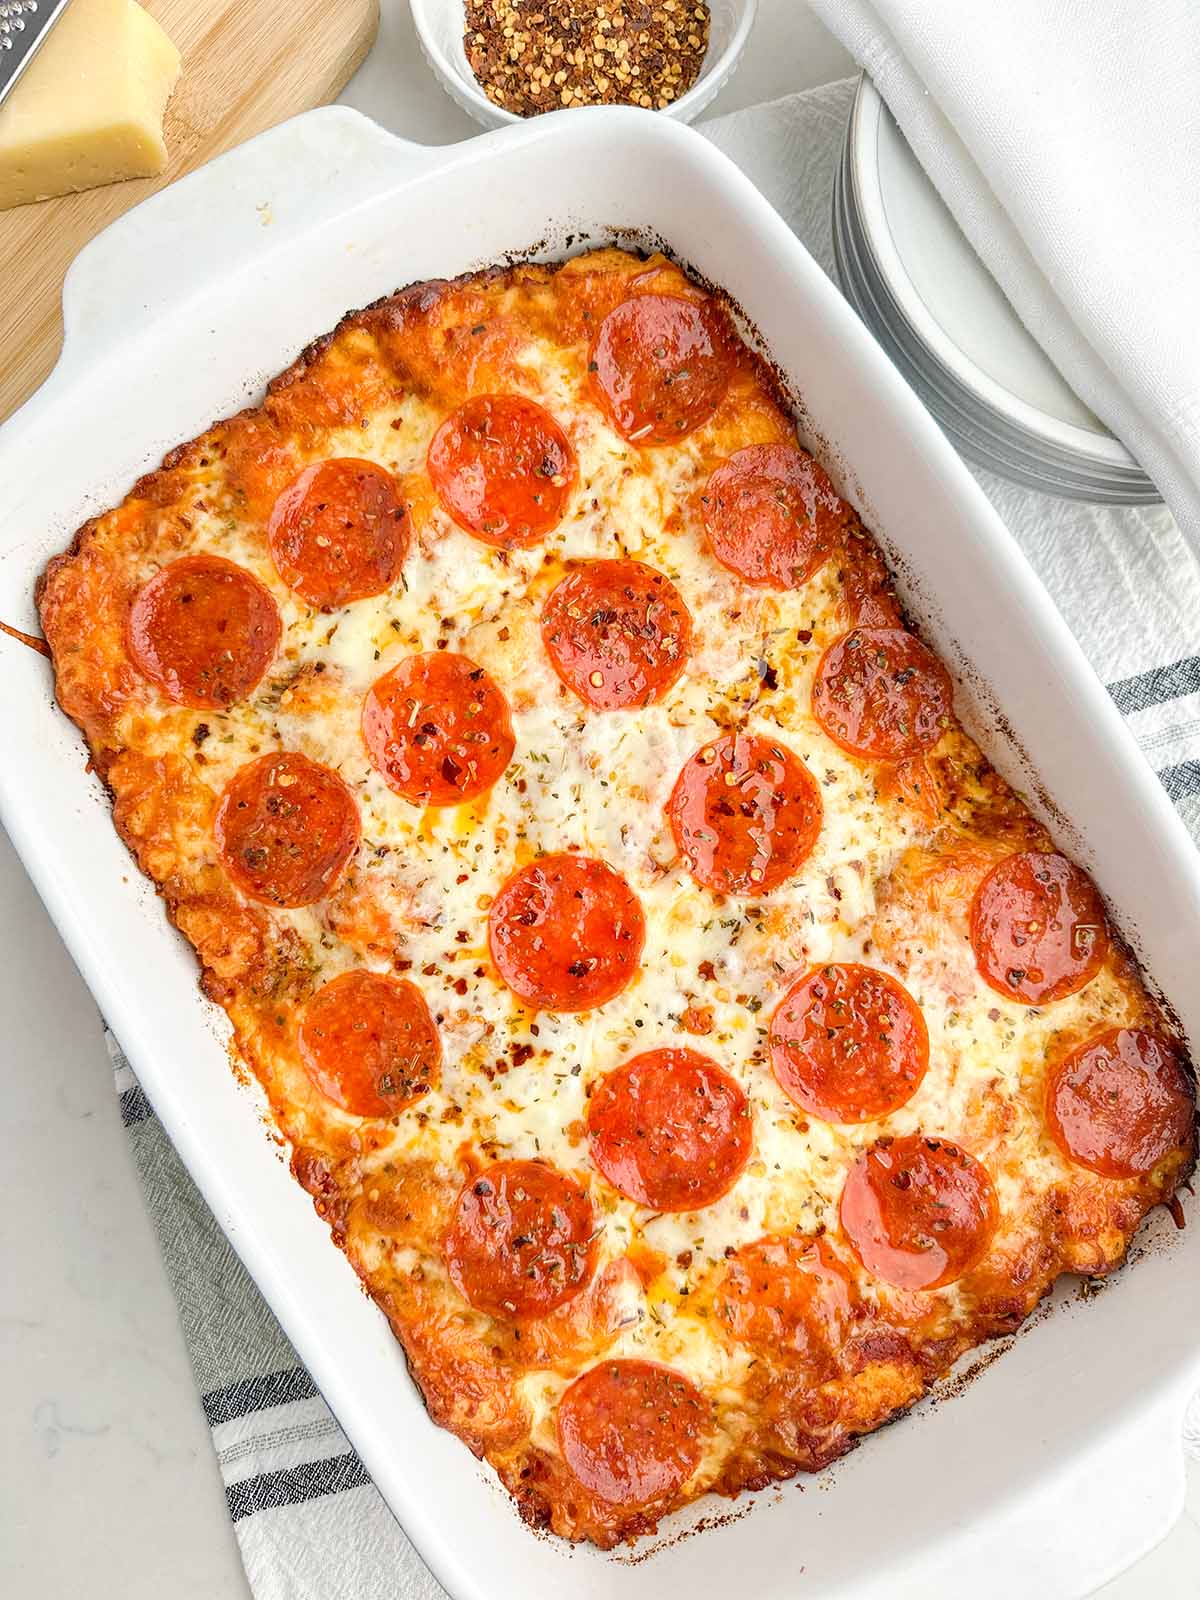 baked pizza casserole in a baking dish.